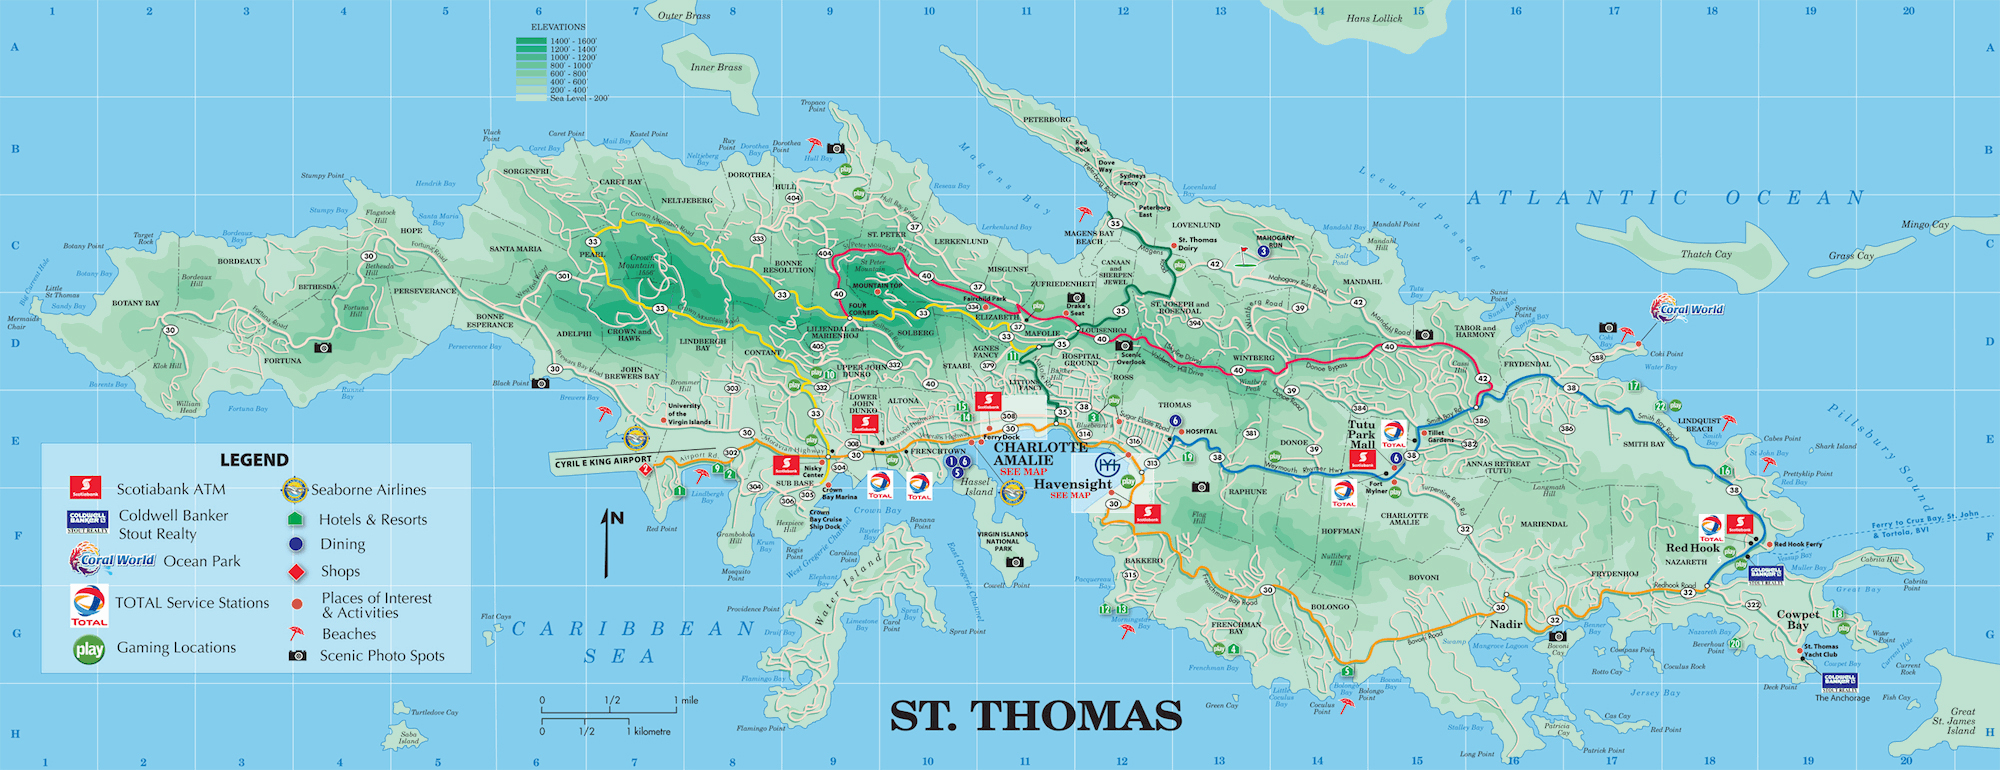 Large Detailed Road And Tourist Map Of St Thomas U S 